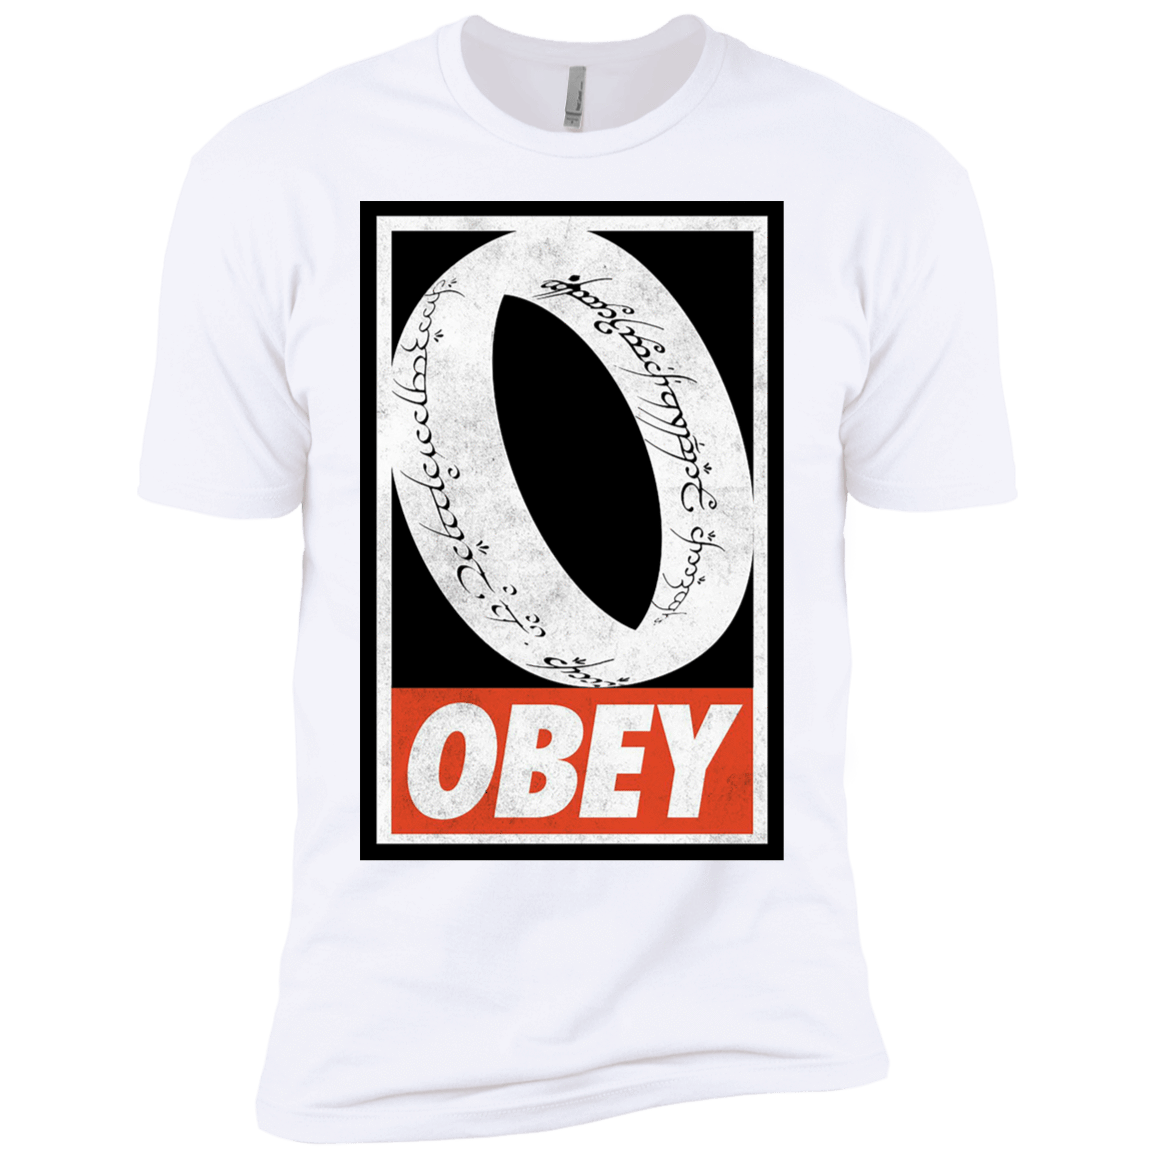 Obey One Ring Boys Premium T-Shirt – Pop Up Tee